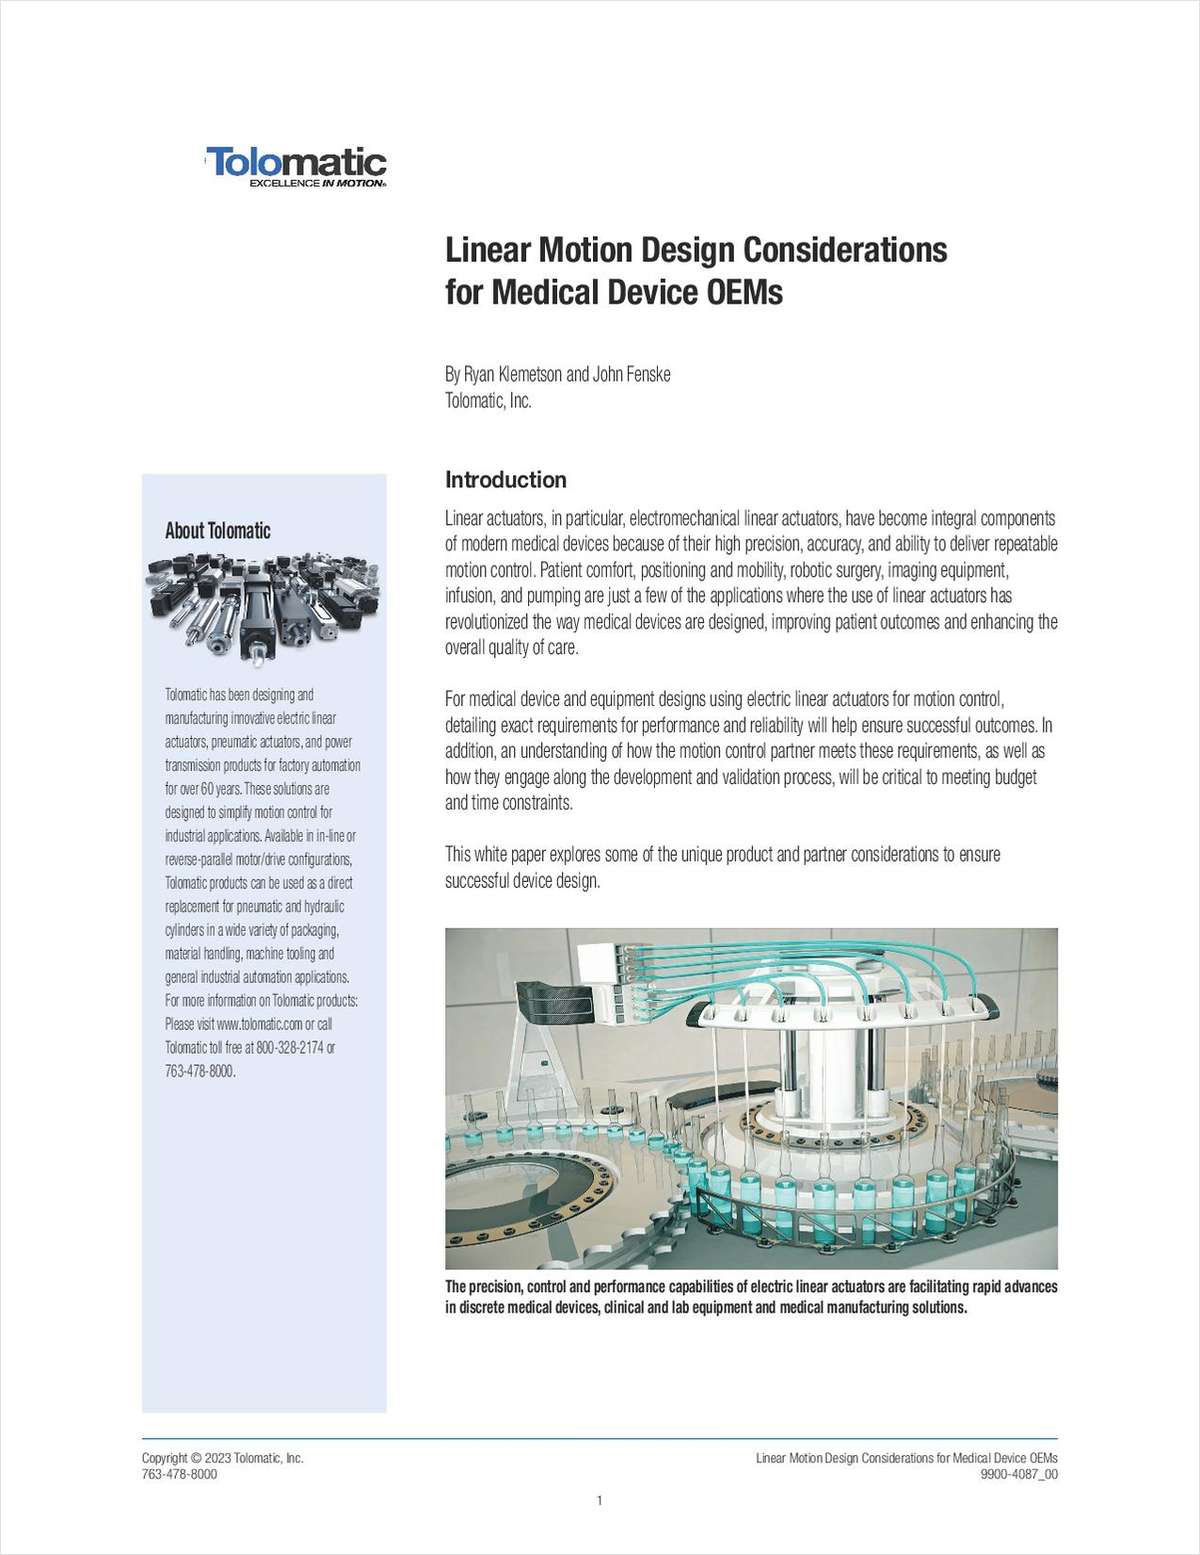 Linear Motion Design Considerations for Medical Device OEMs